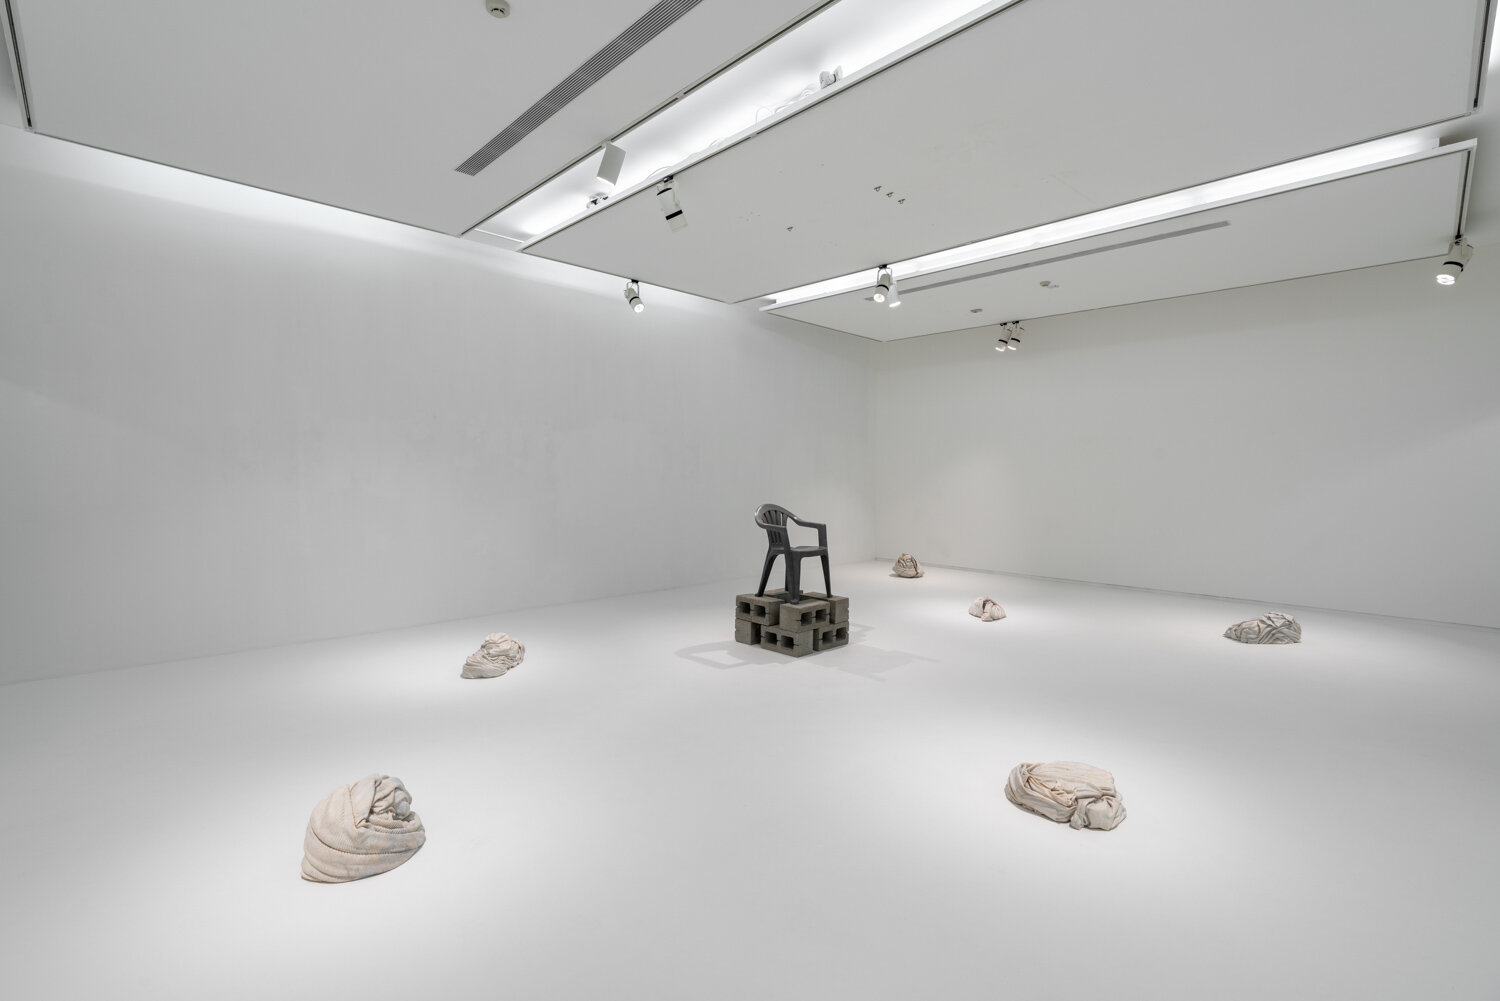   Once There Sullivan+Strumpf, Singapore  22 November - 22 December, 2019    In ‘Once There’, Alex Seton plays with, inverts and exaggerates the techniques and language of classical statuary and monument to create works that reflect on the contempora